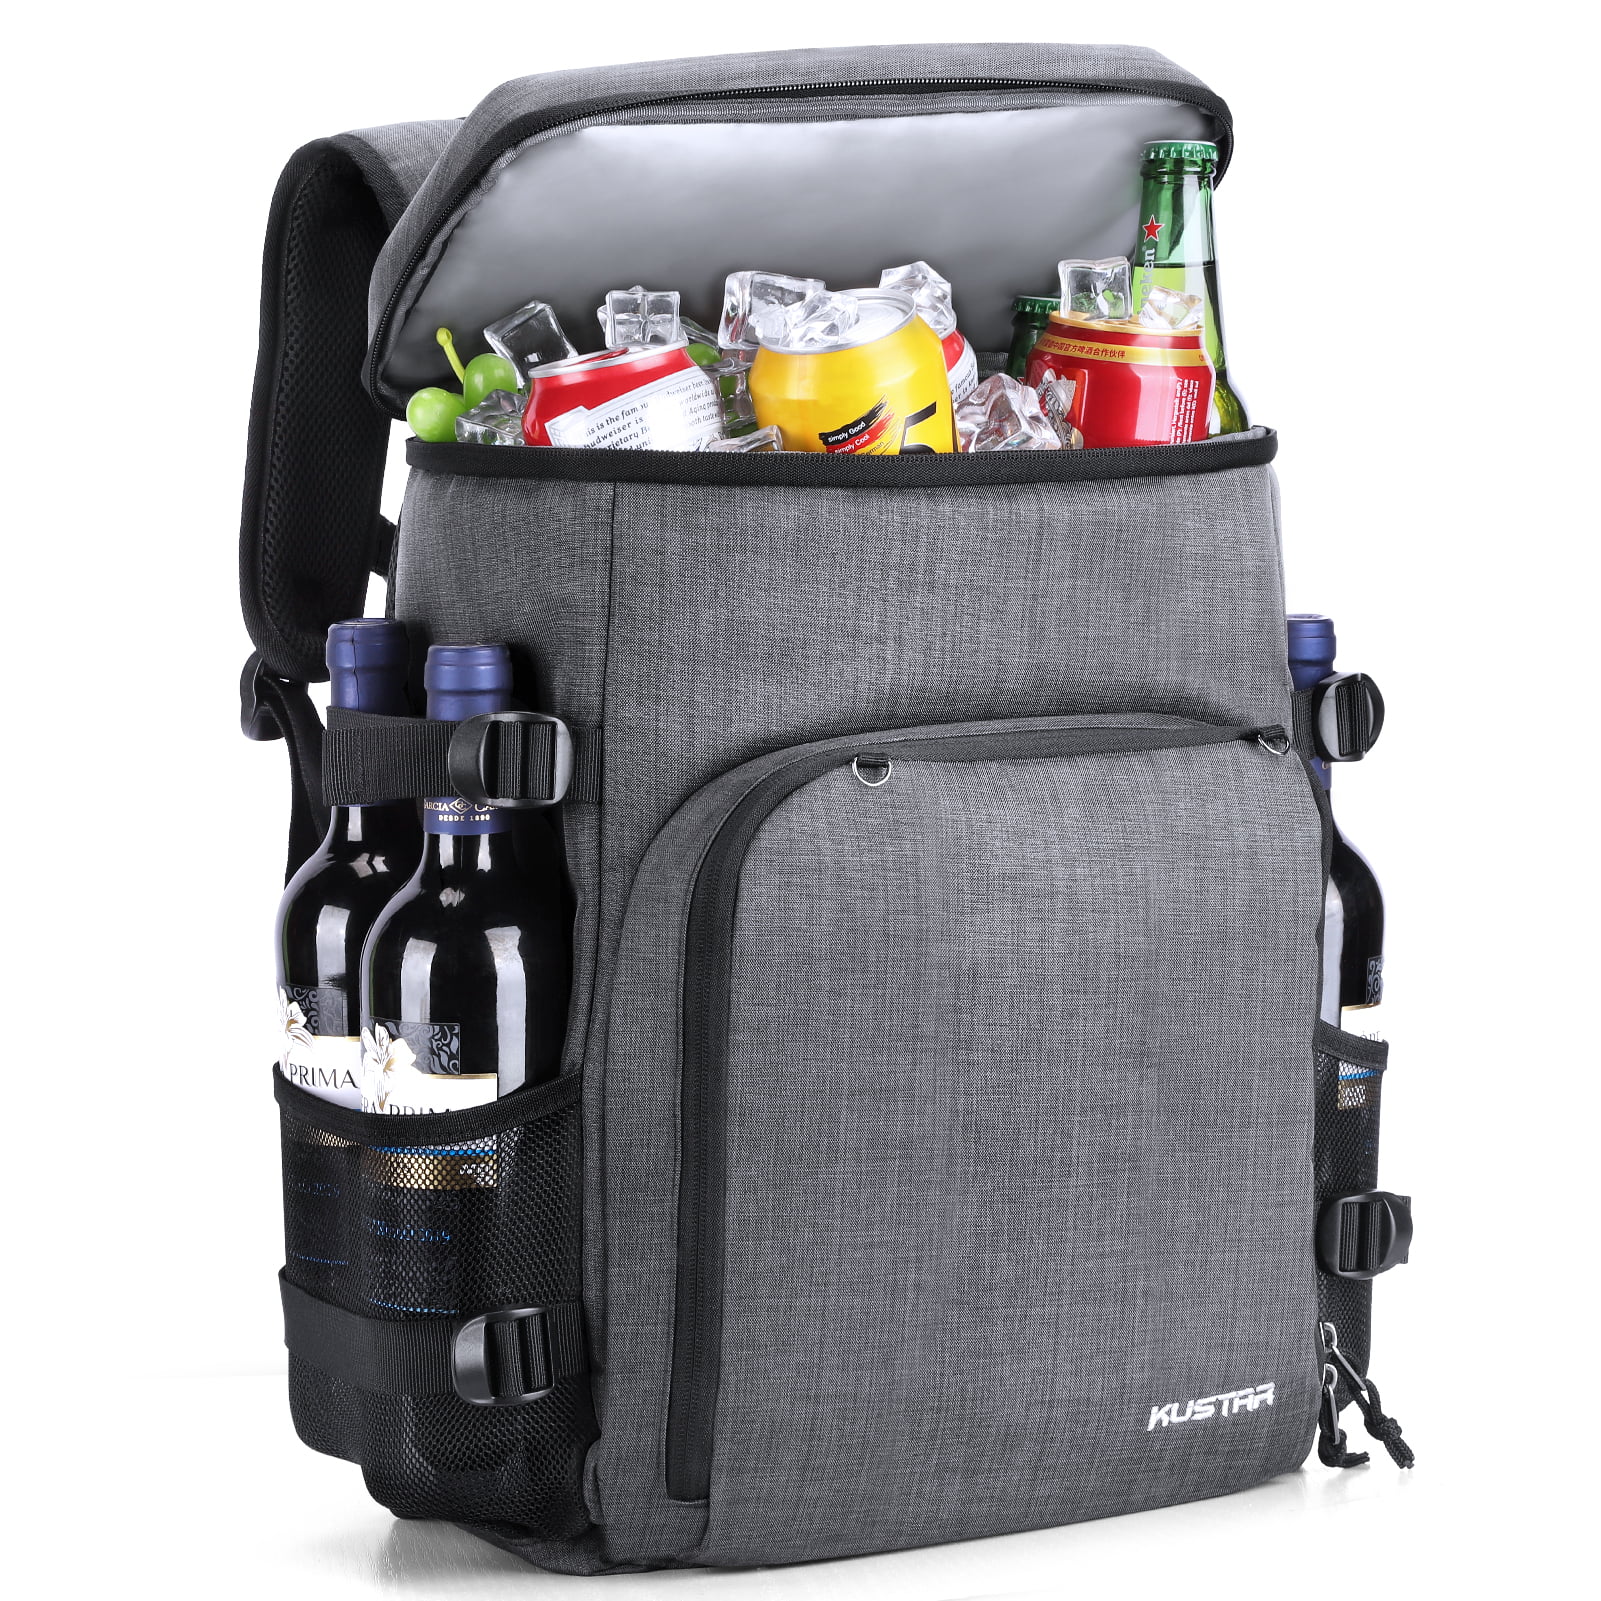 KUSTAR Cooler Backpack 35 Cans,2 in 1 Soft Sided Coolers